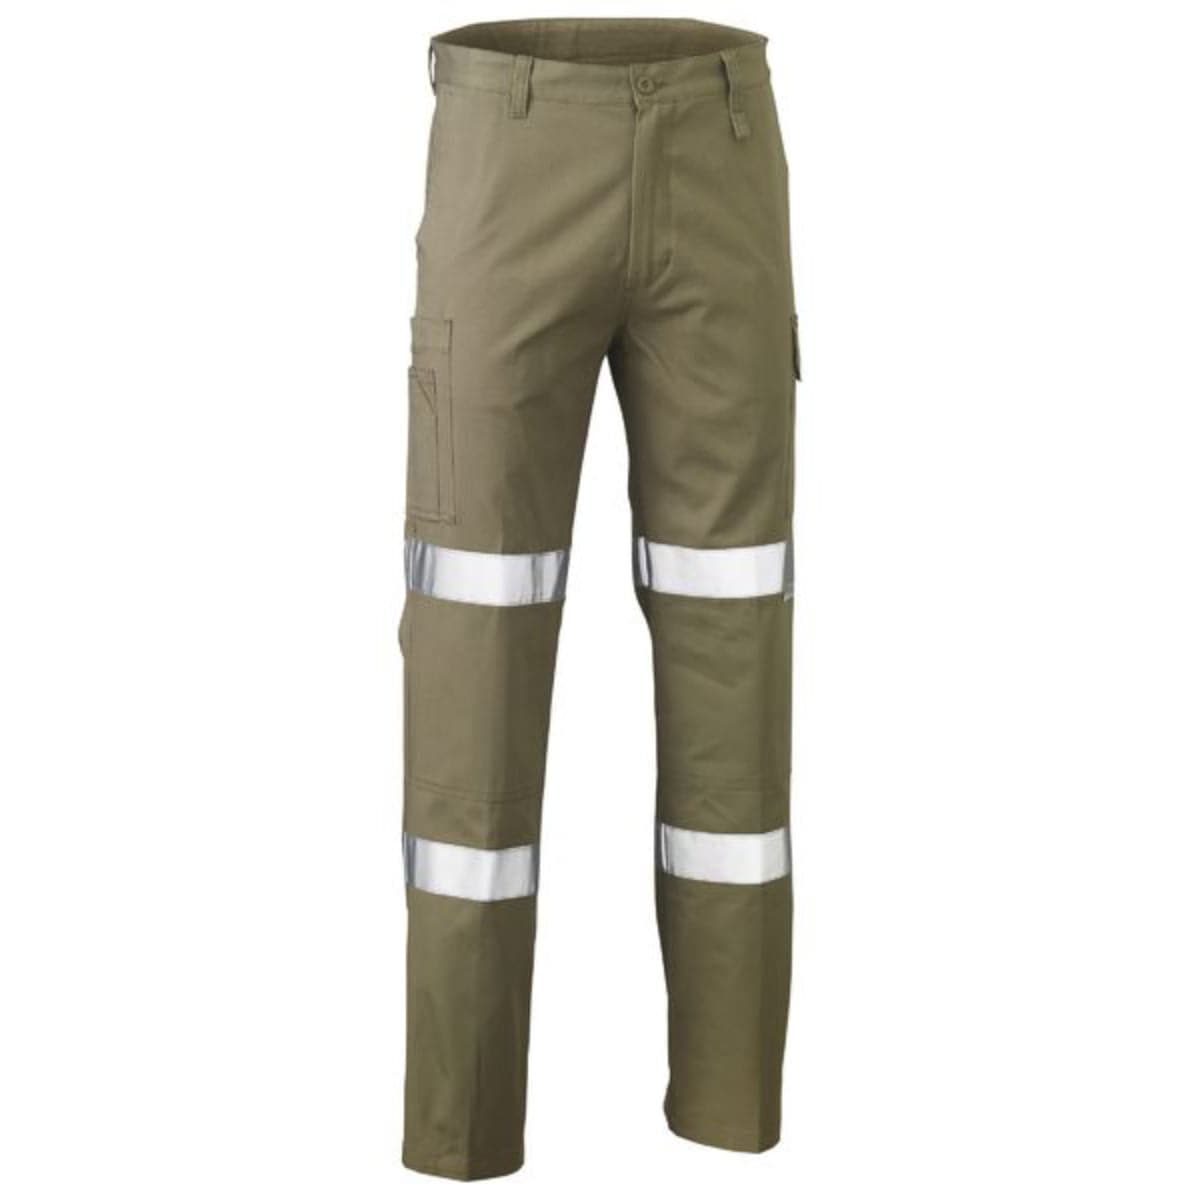 Bisley Taped Biomotion Cool Lightweight Utility Pants BP6999T